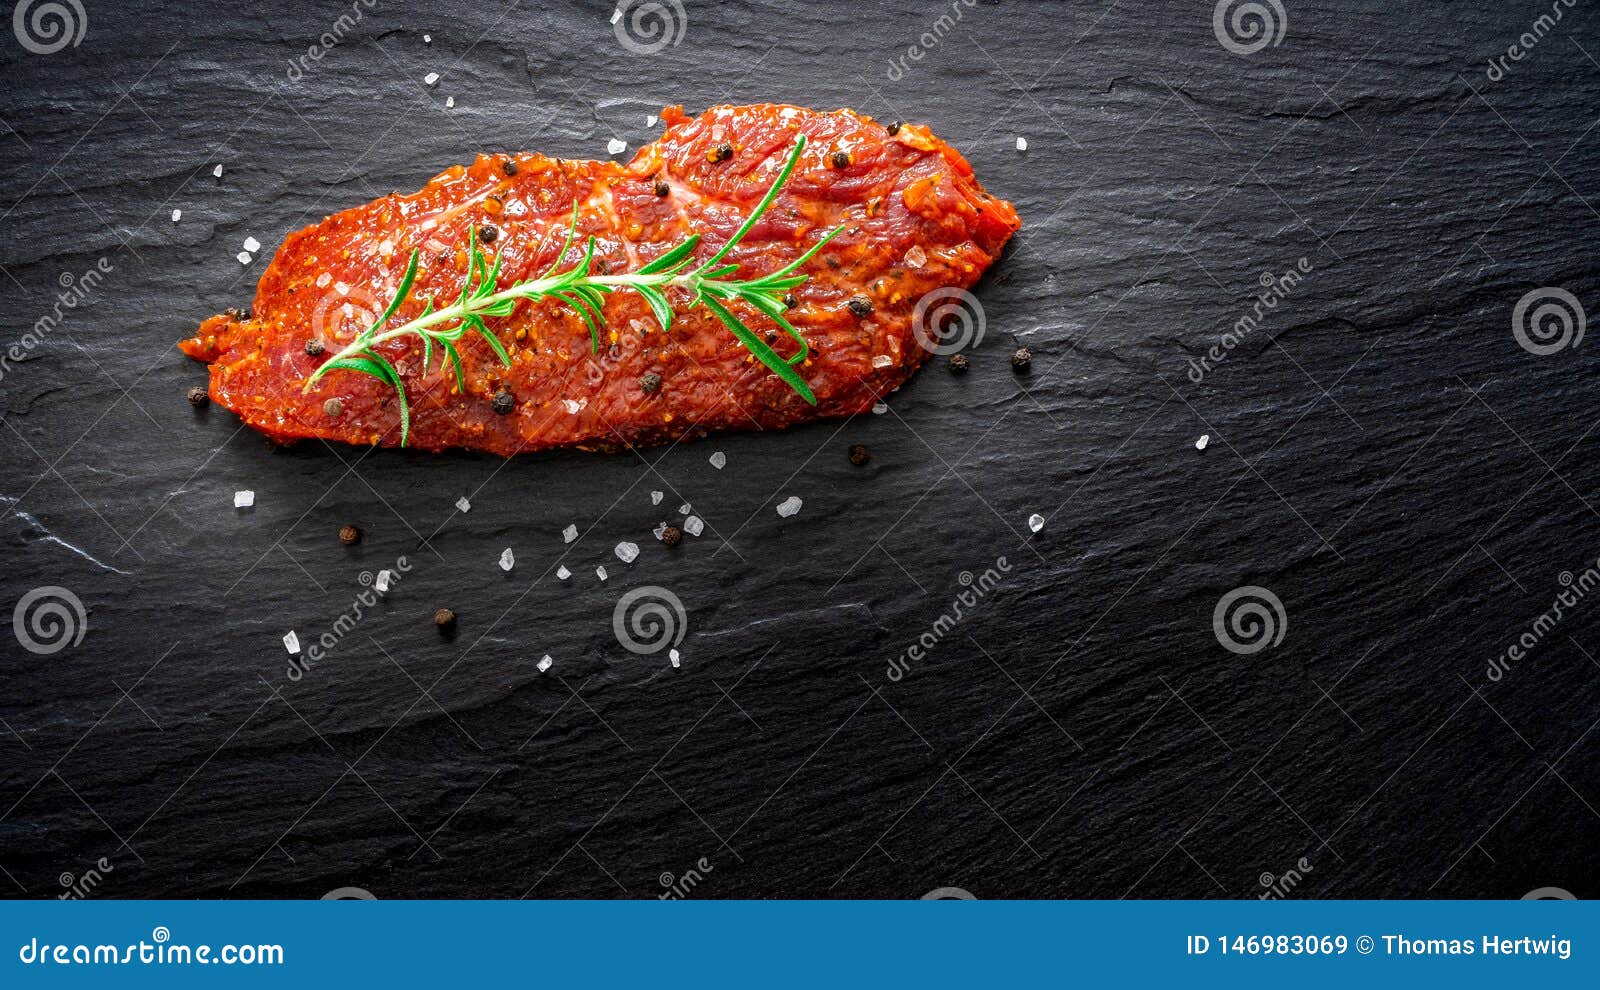 raw marinated meat, beef steak on black slate background, top view